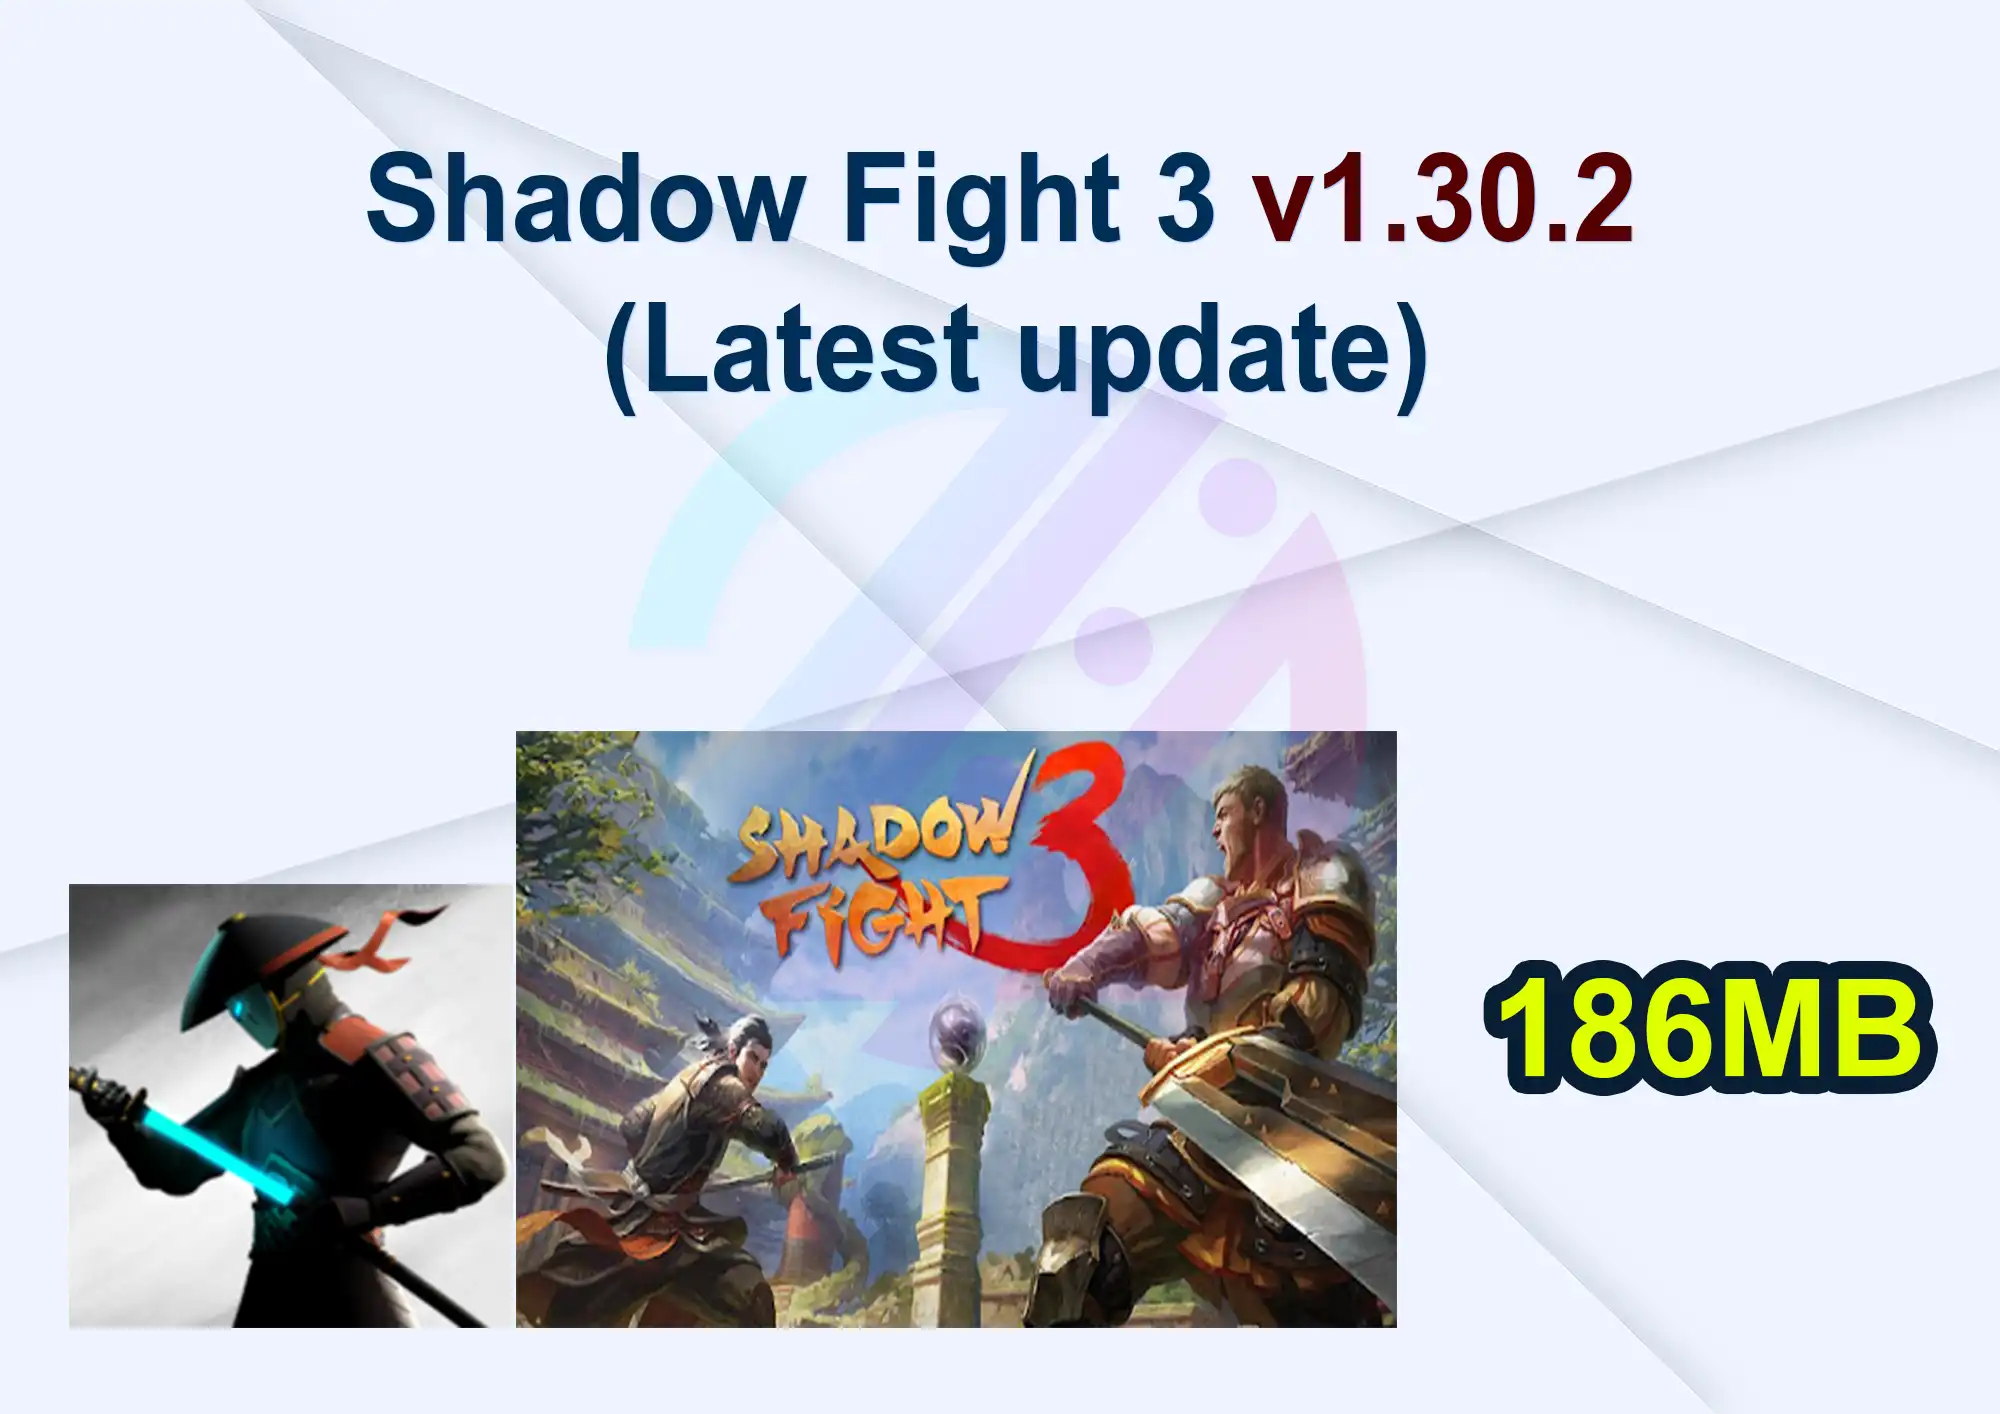 Shadow Fight 3 v1.30.2 (Latest update)